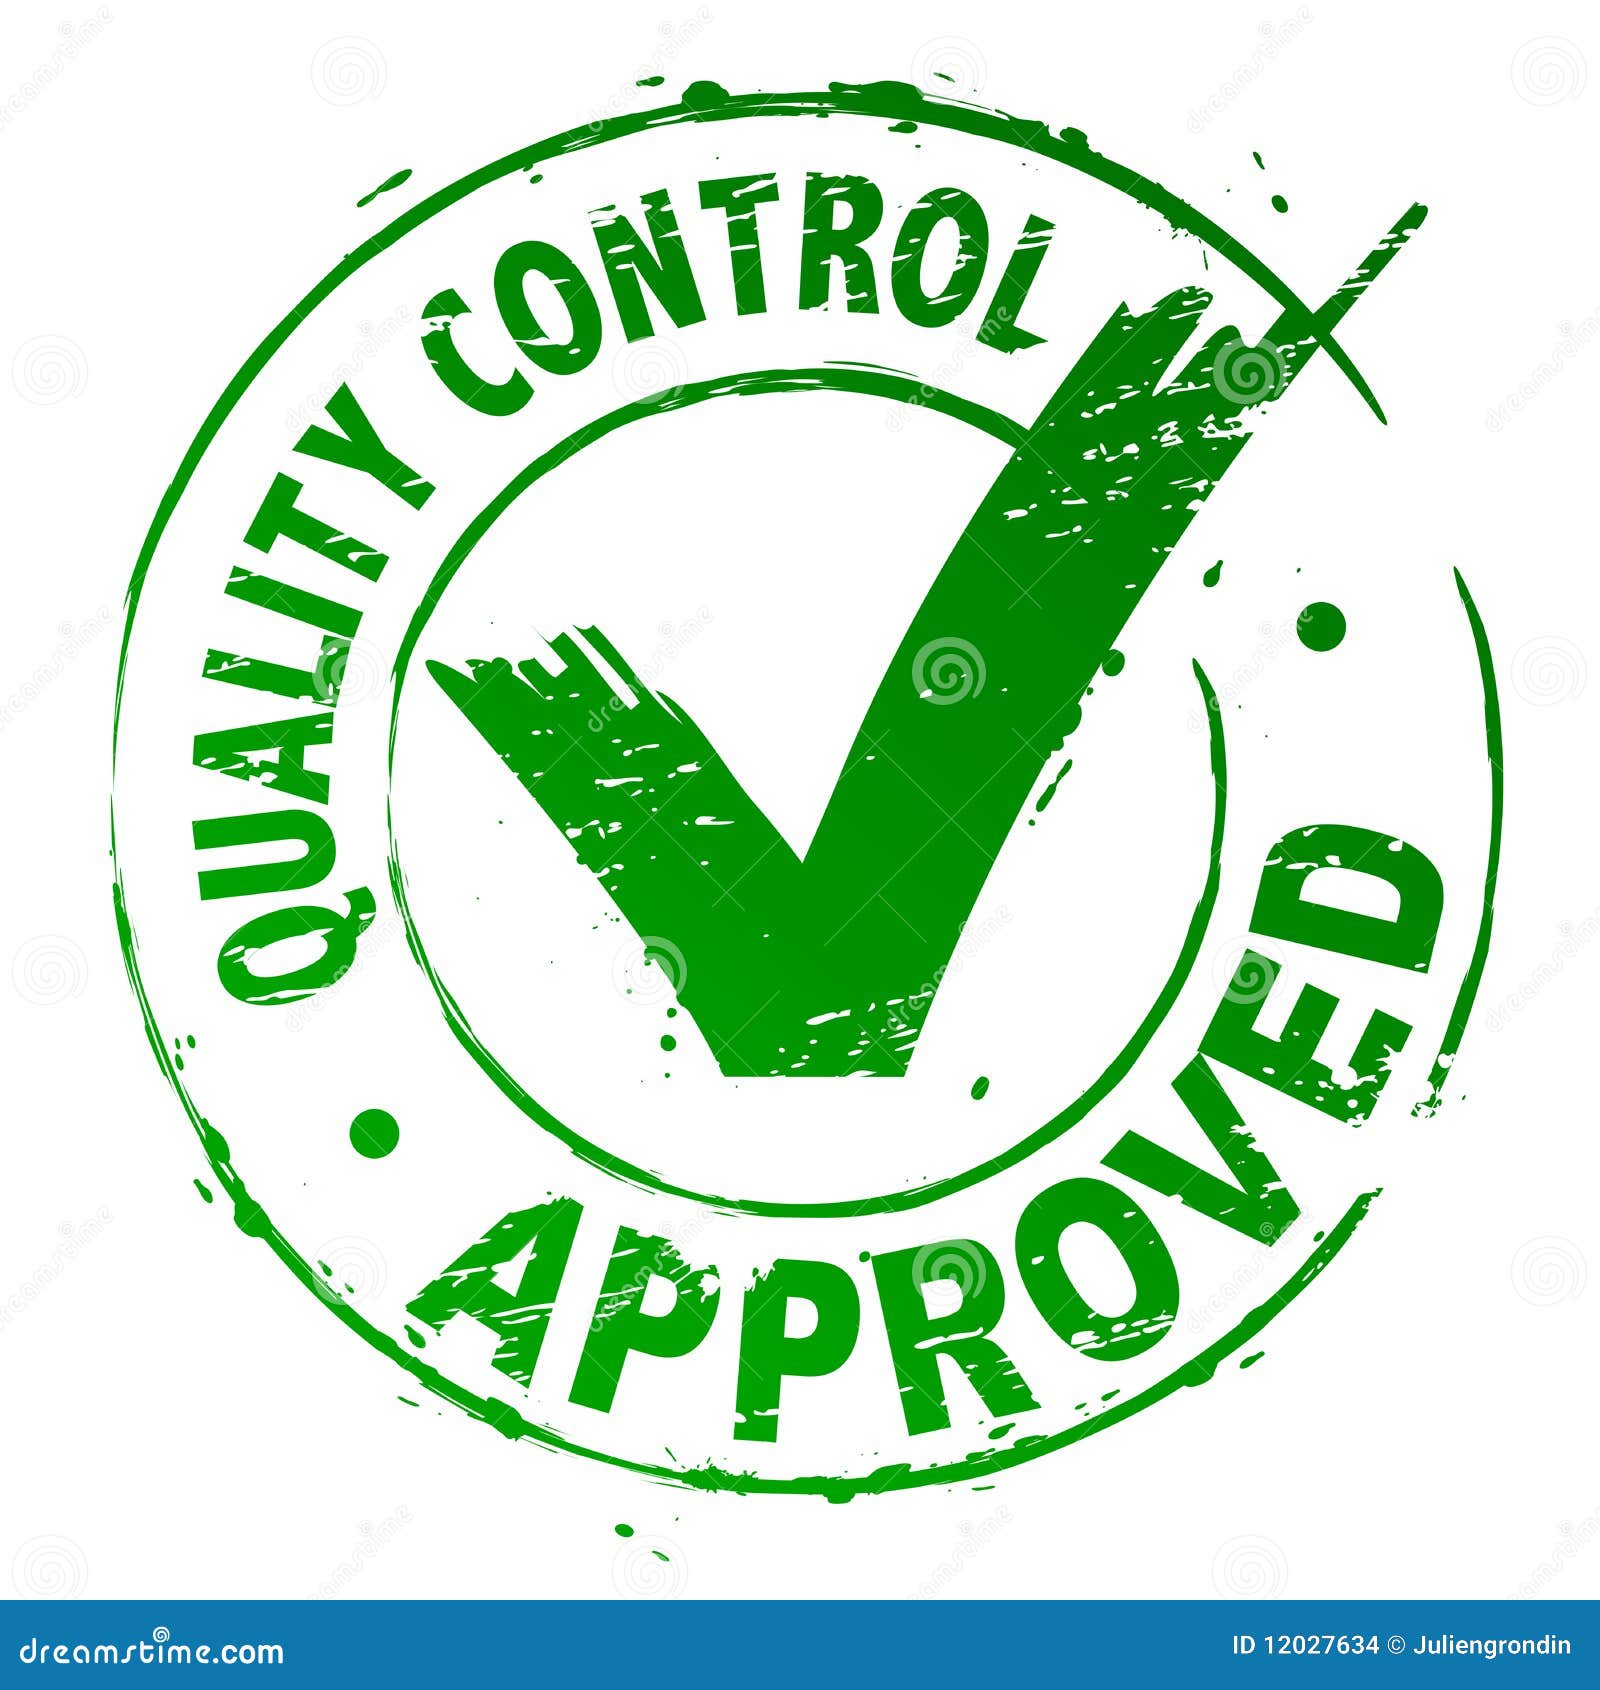 clipart for quality control - photo #6